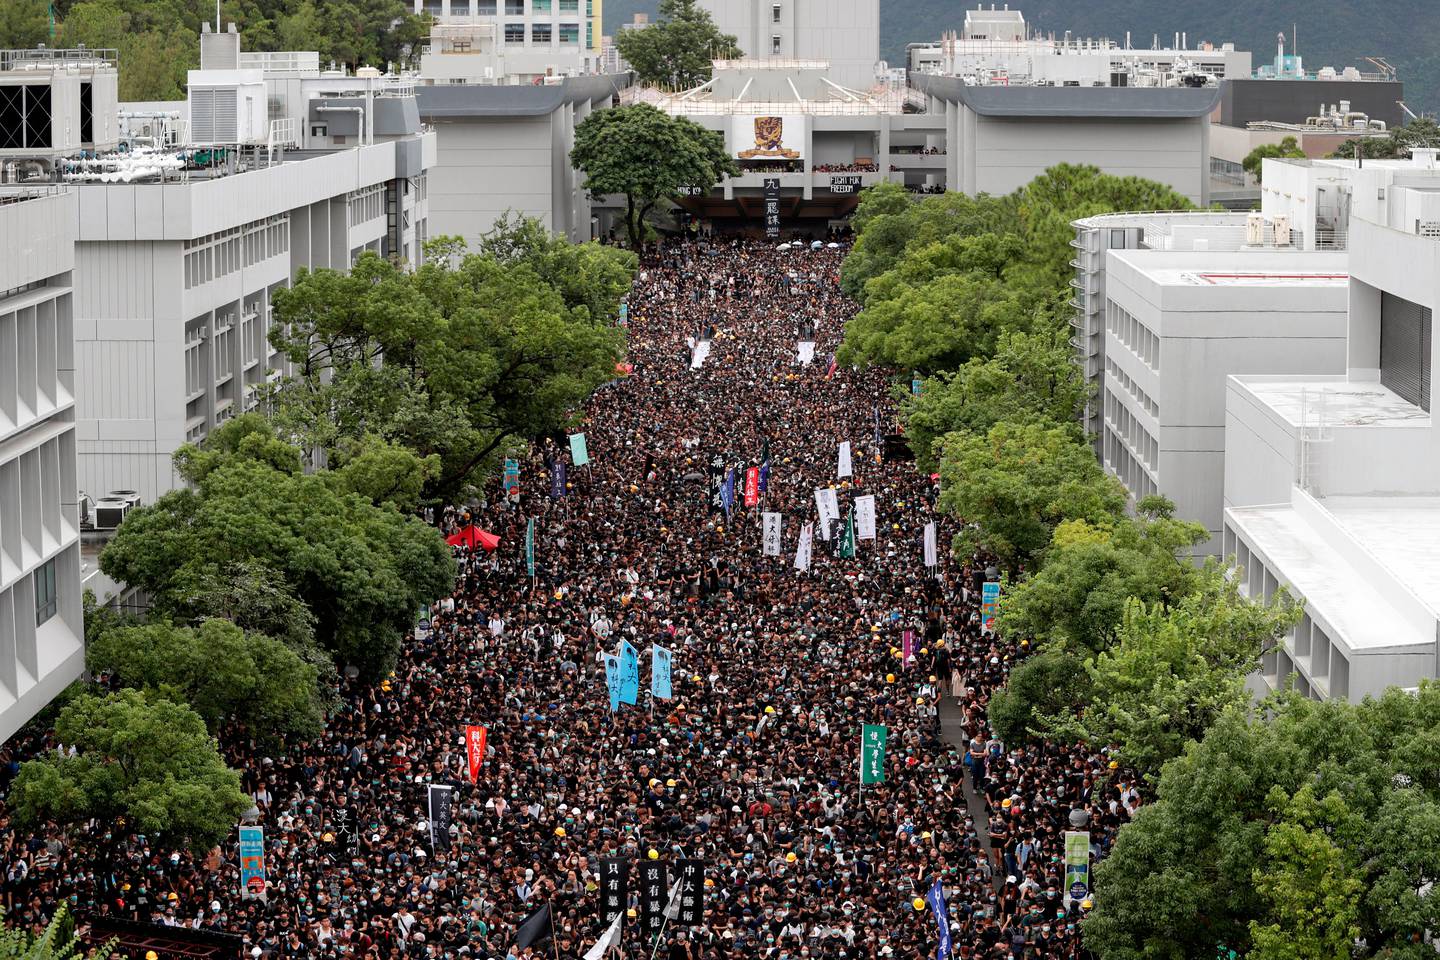 Students boycott their classes as they take part in a protest against the extradition bill at the Chinese University of Hong Kong, China September 2, 2019. REUTERS/Tyrone Siu REFILE - CORRECTING INFORMATION